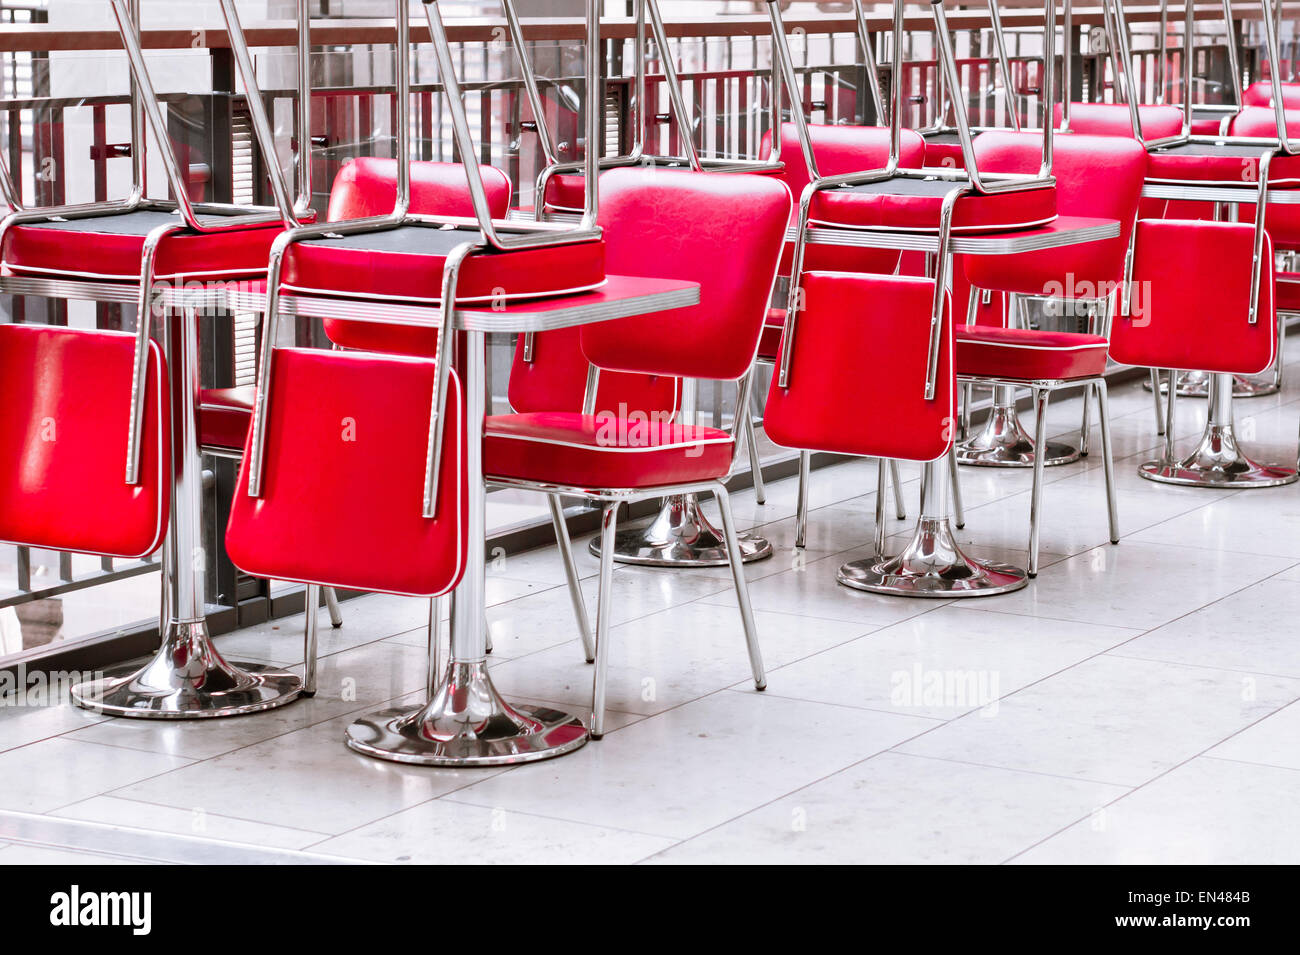 Stacked red leather chairs in a closed restaurant in the UK Stock Photo